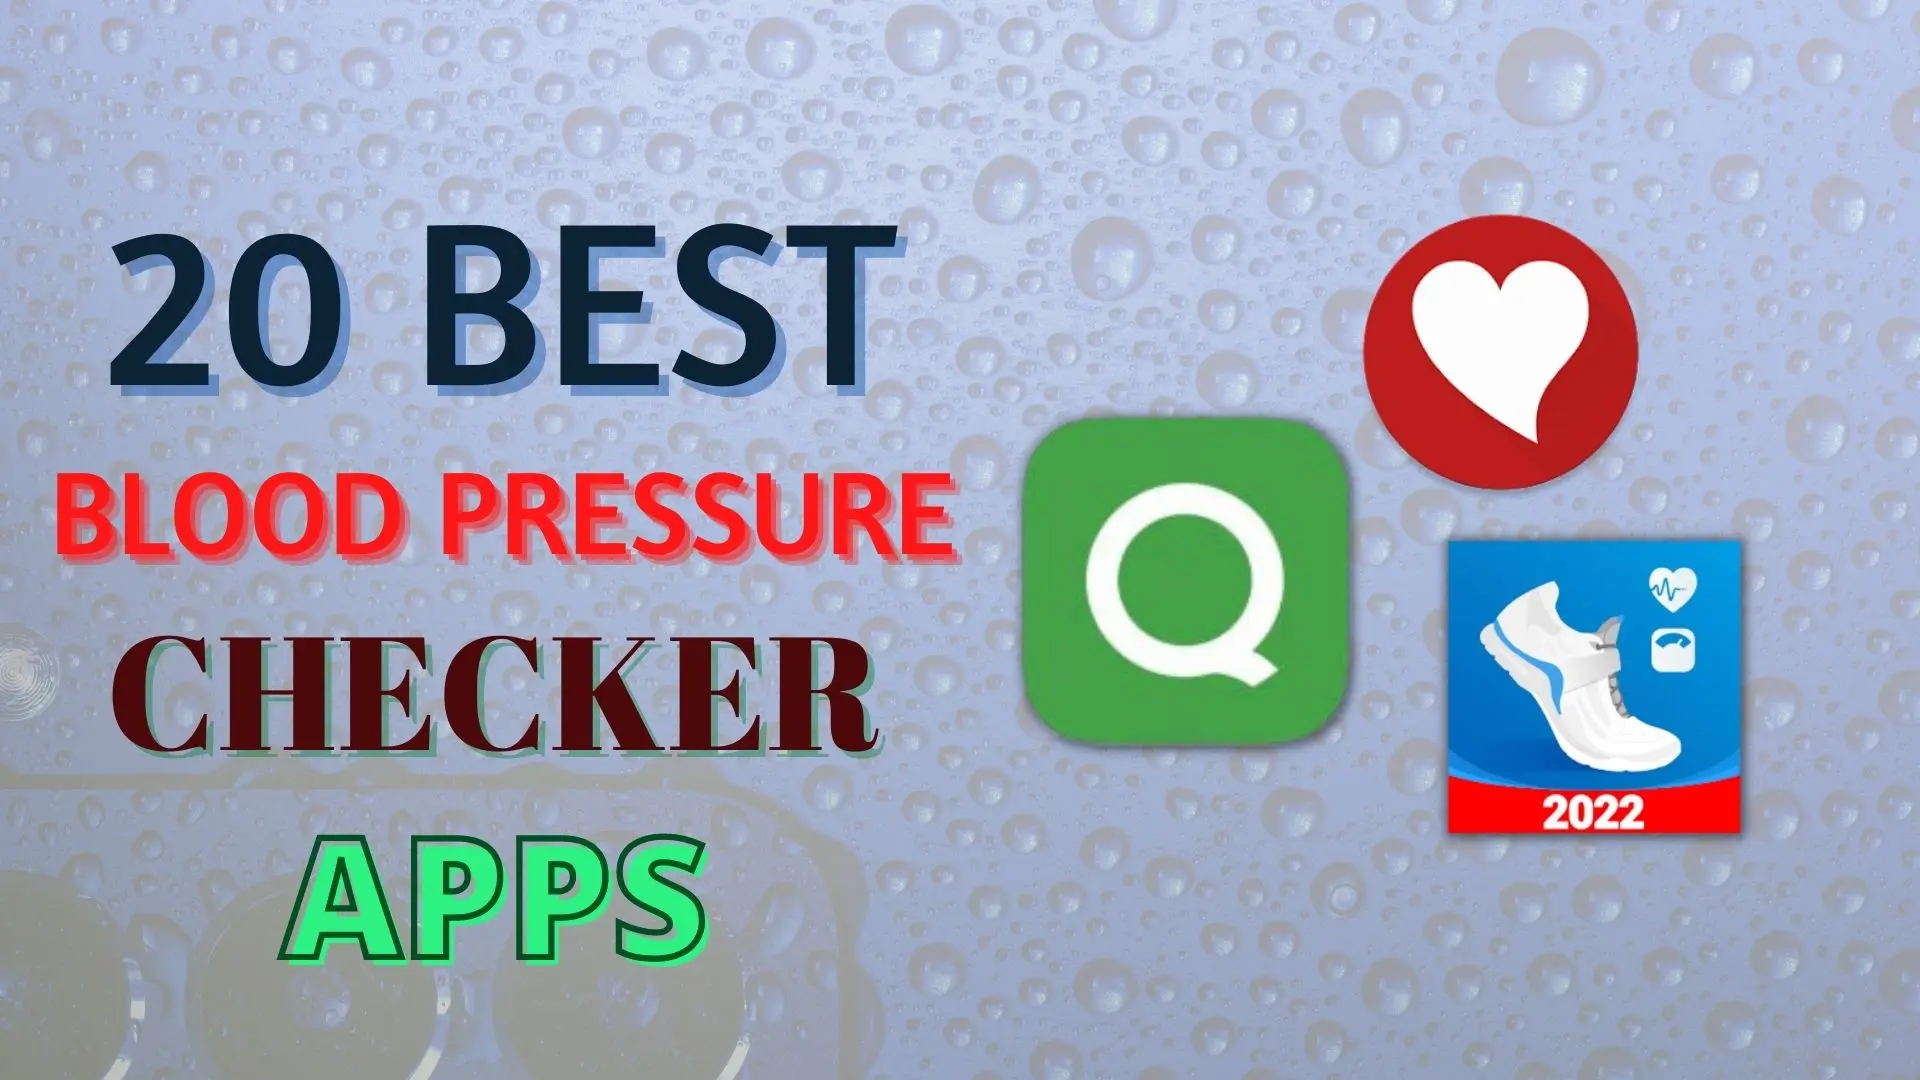 20 Best Blood Pressure Apps for Android in 2022